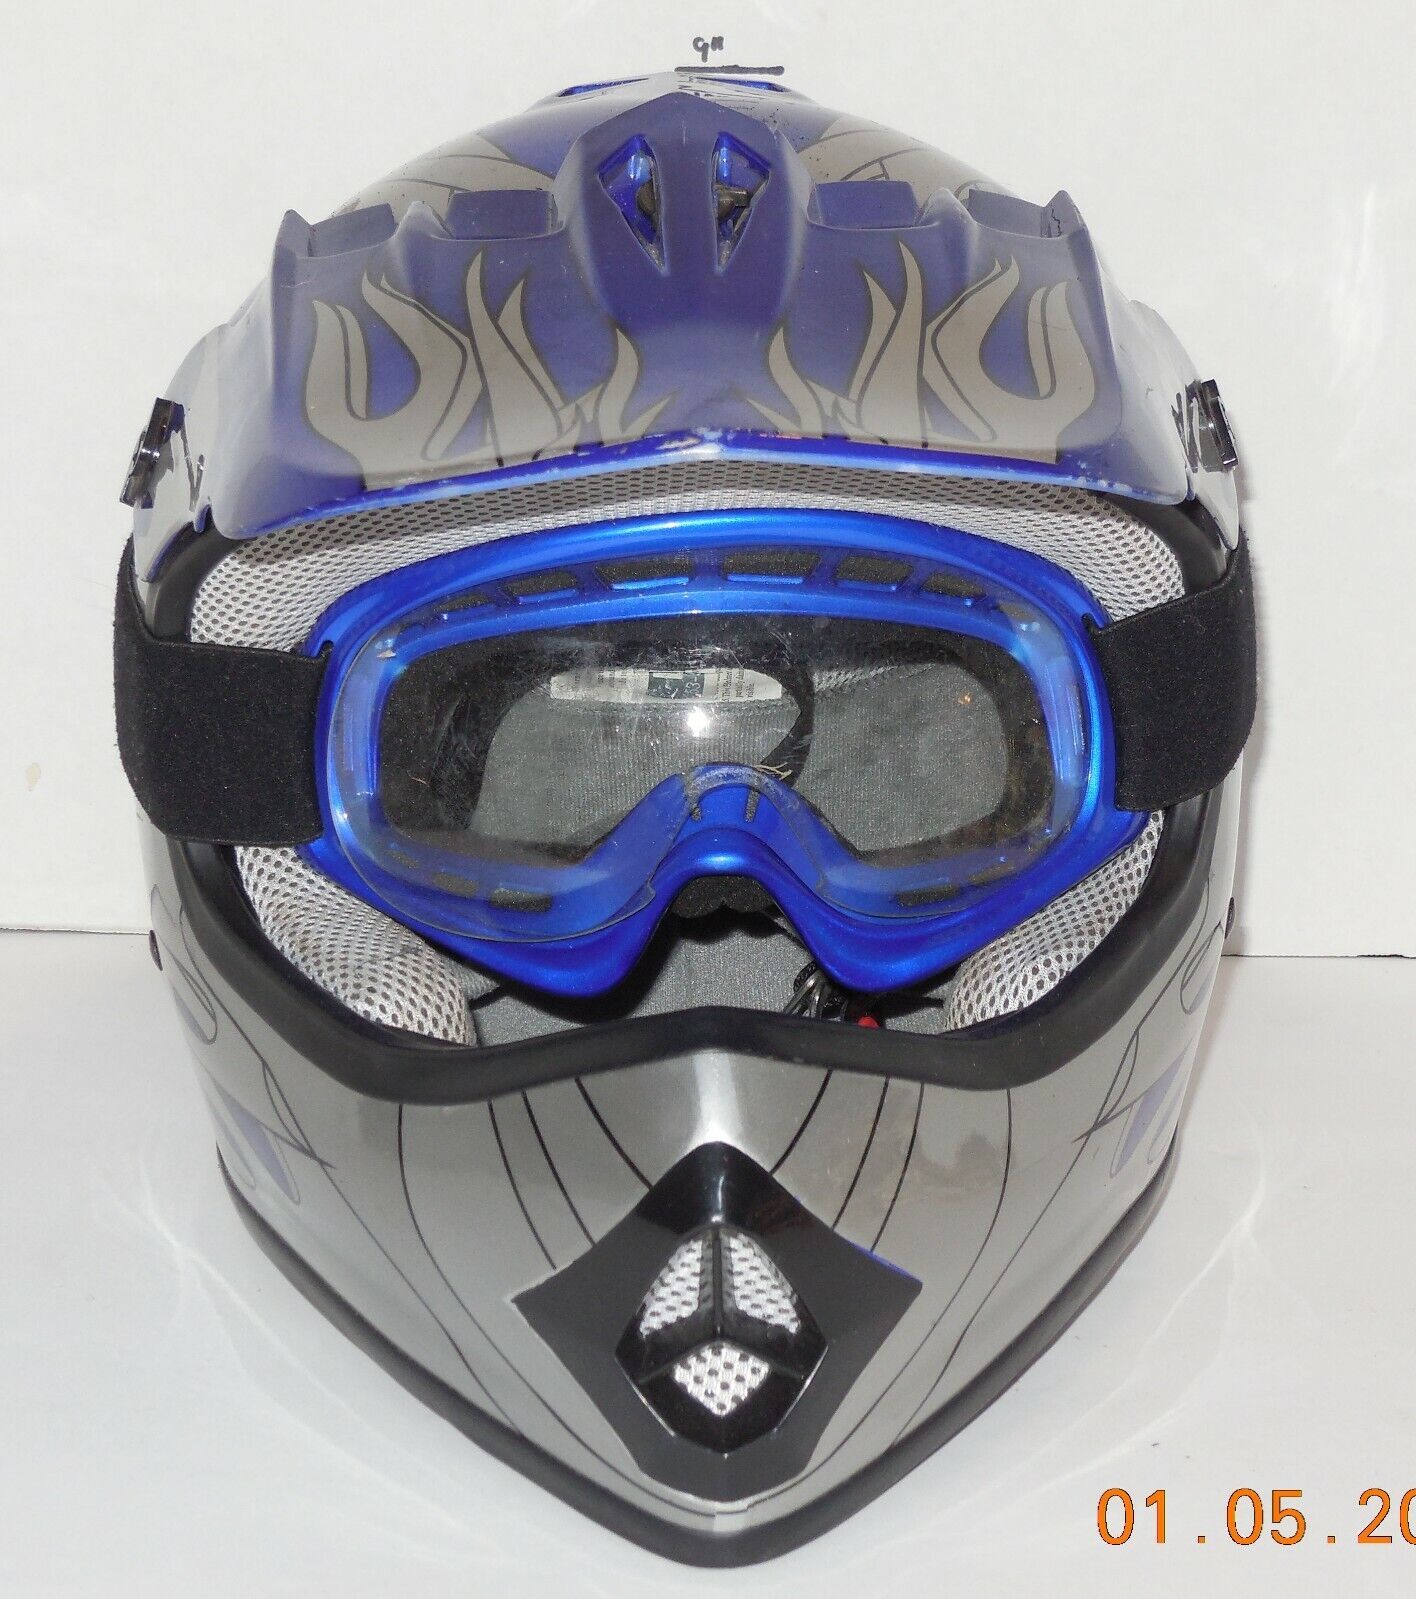 Primary image for TCMT HY601 Motocross Helmet Size Large 53-54cm Blue DOT approved with goggles